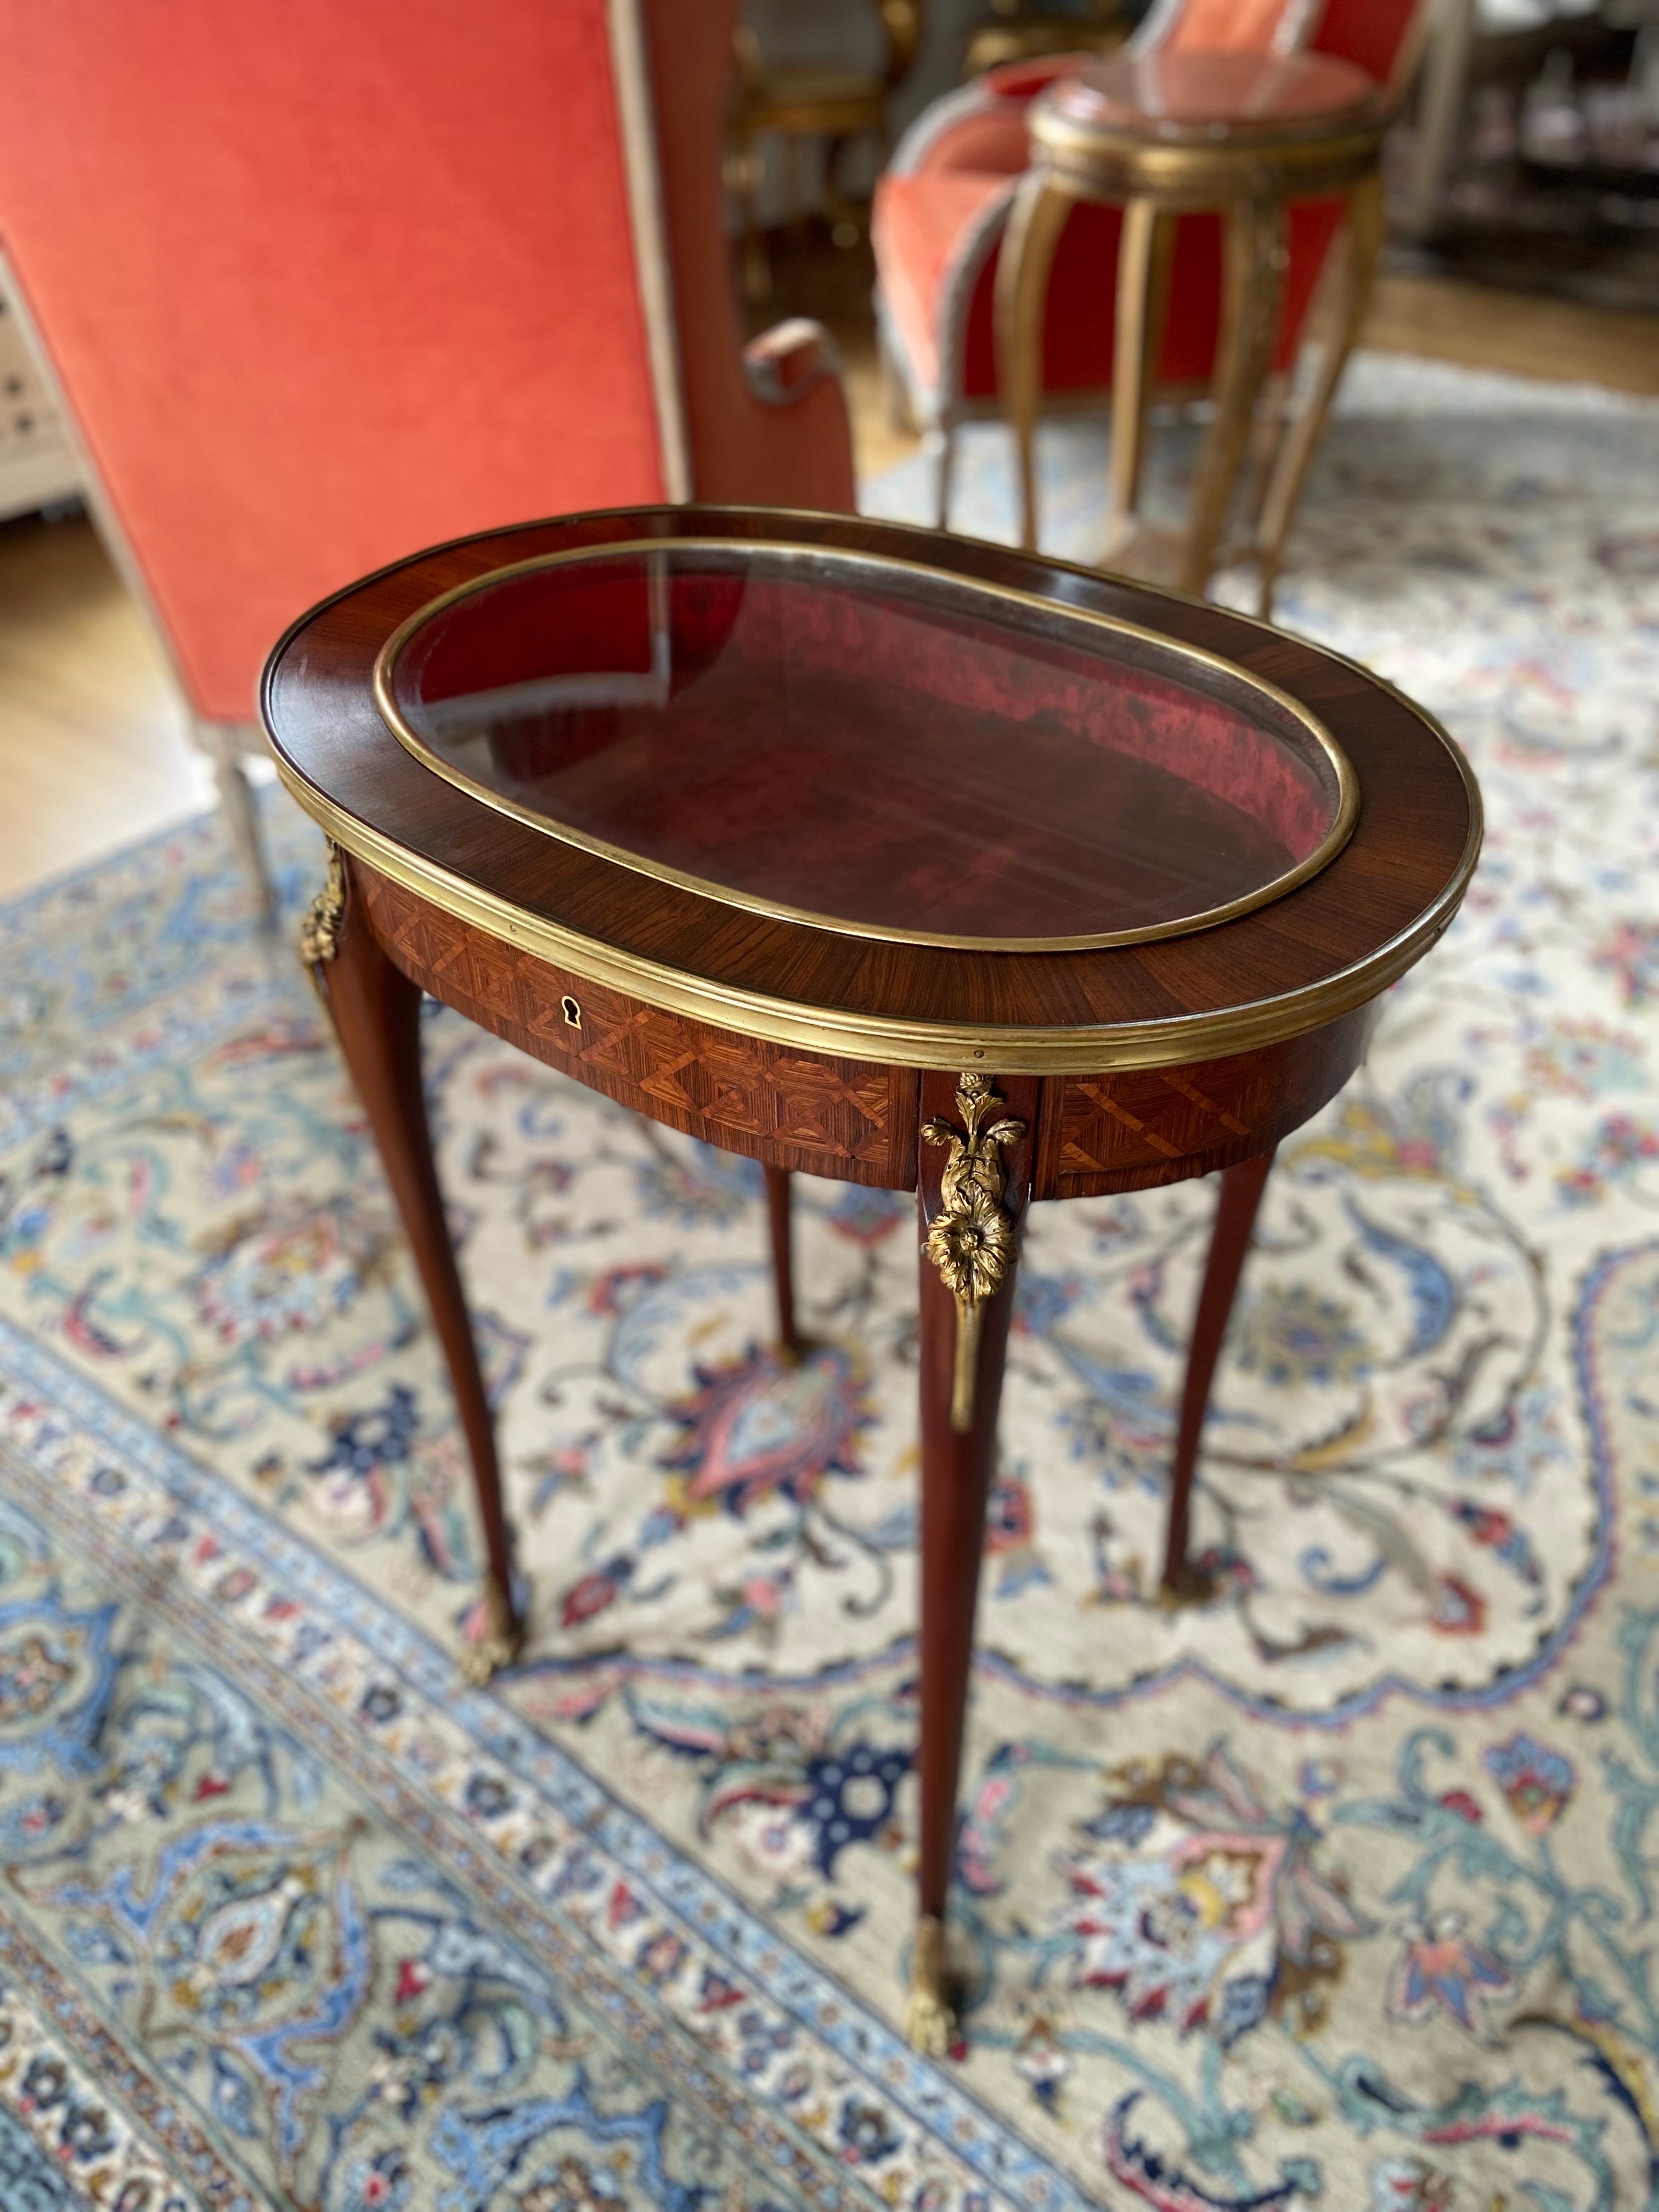 A fine quality French late 19th century mahogany hand carved inlaid oval table bijouterie cabinet in Louis XVI style. The glass top opening to access the red velvet interior. Raised on four elegant cabriole legs, each one ending with bronze paw.